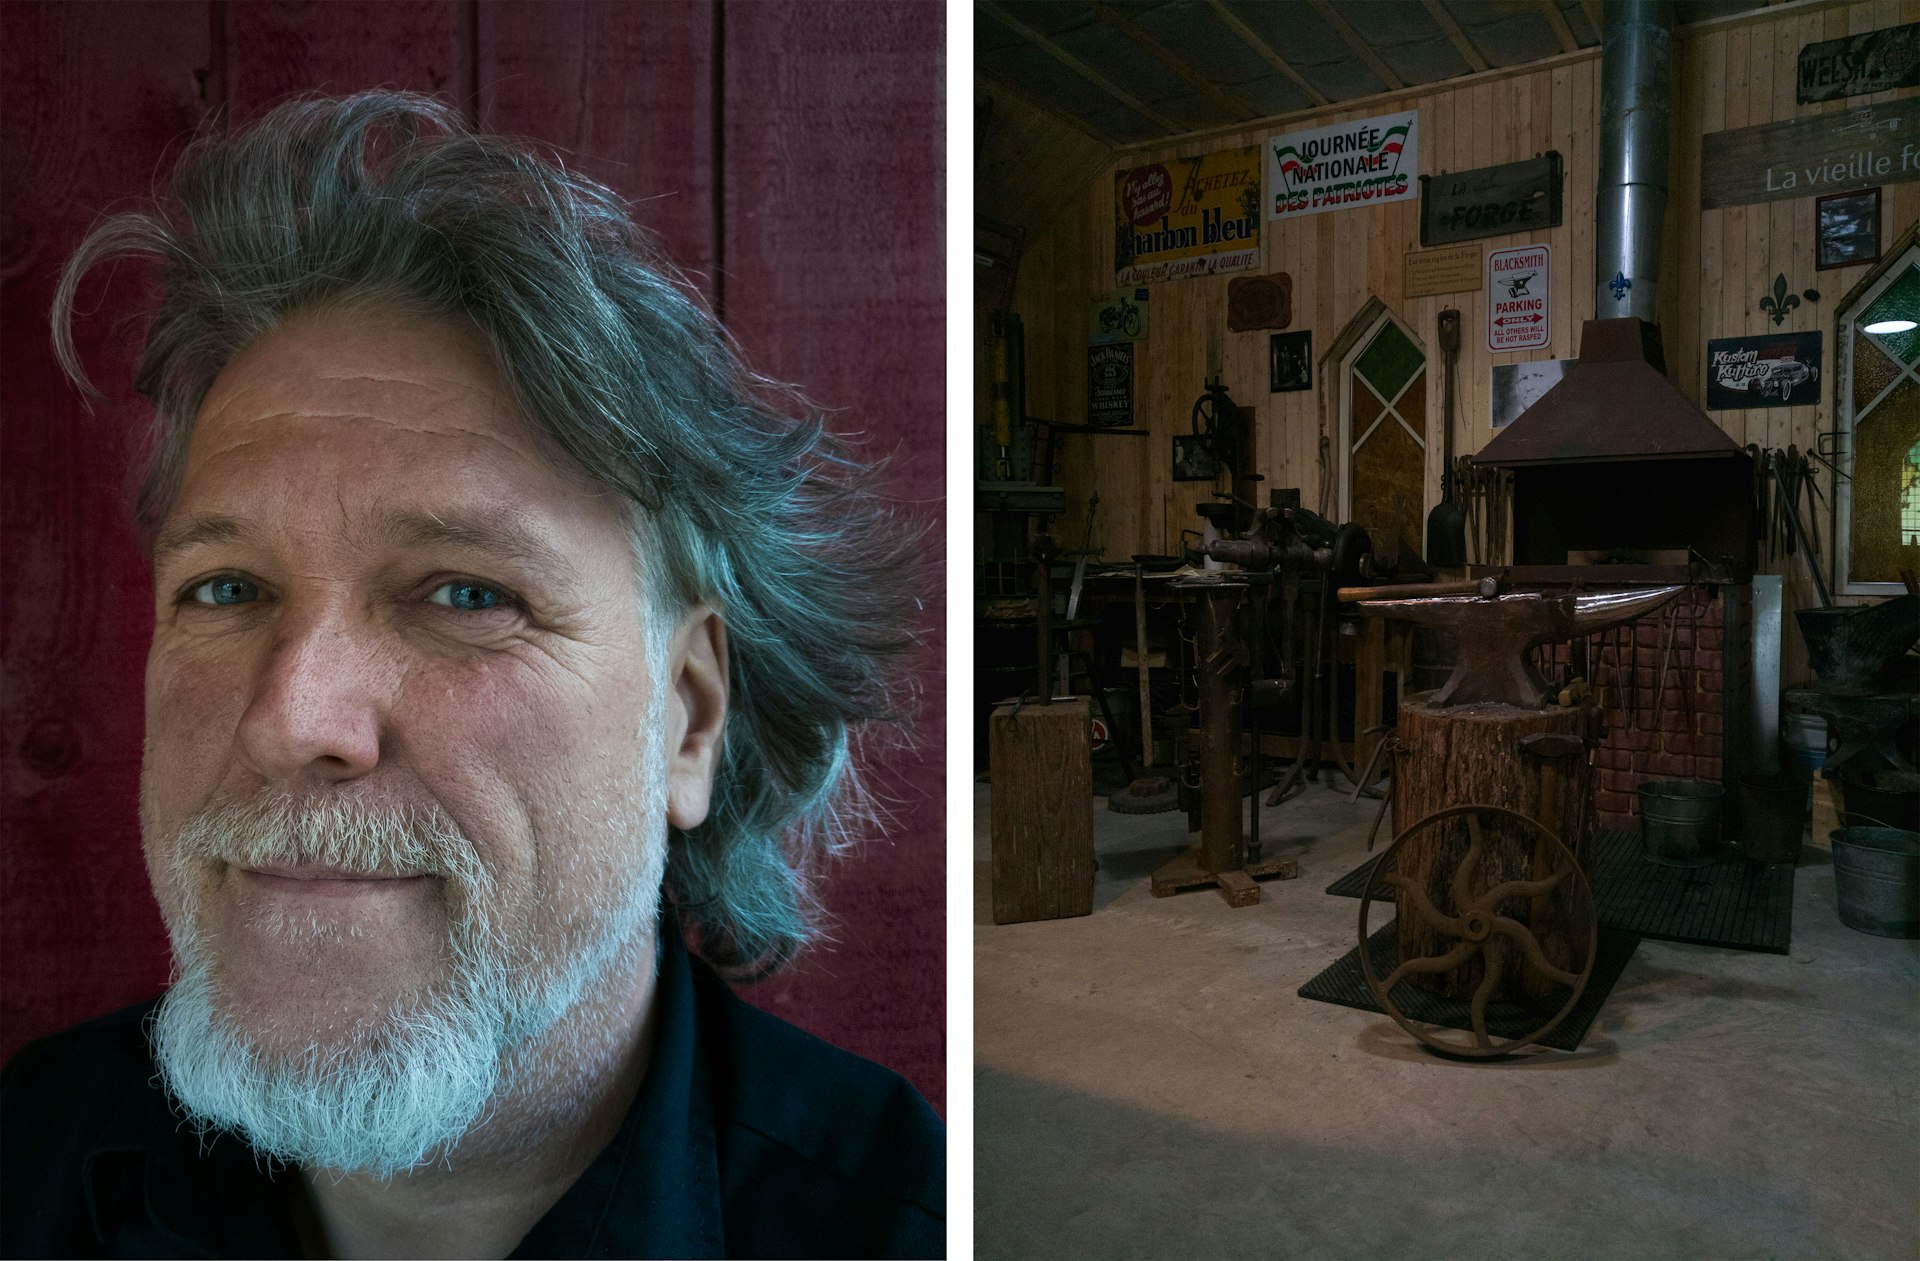 Sylvain Rondeau, a blacksmith, just moved to Inverness, attracted by the bronze foundry, the bucolic setting and the potential for community building.